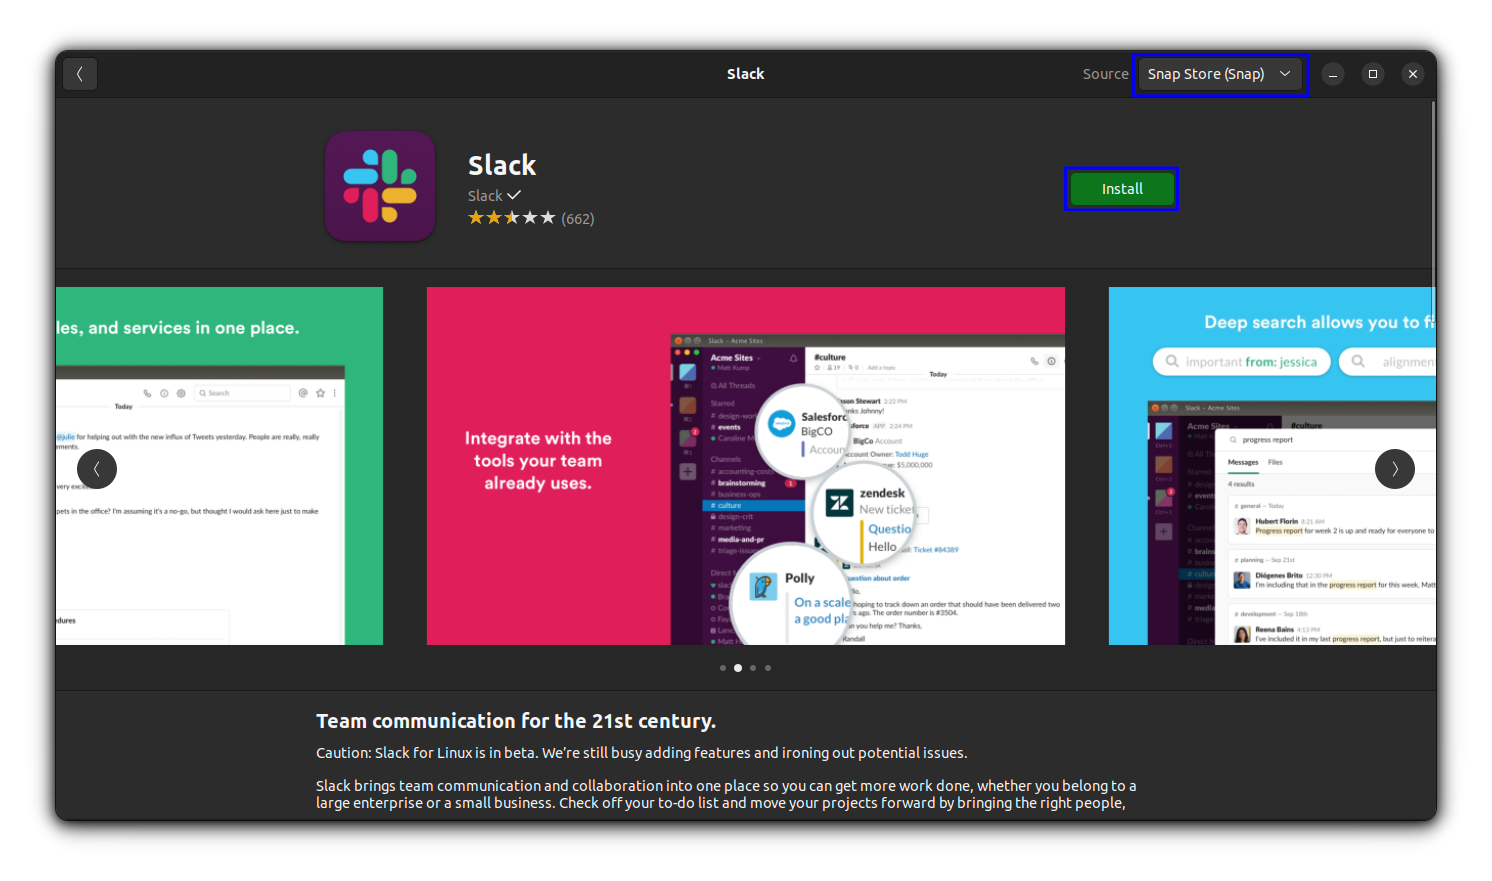 Install slack snap application through software center by searching for it and clicking on the "Install" button